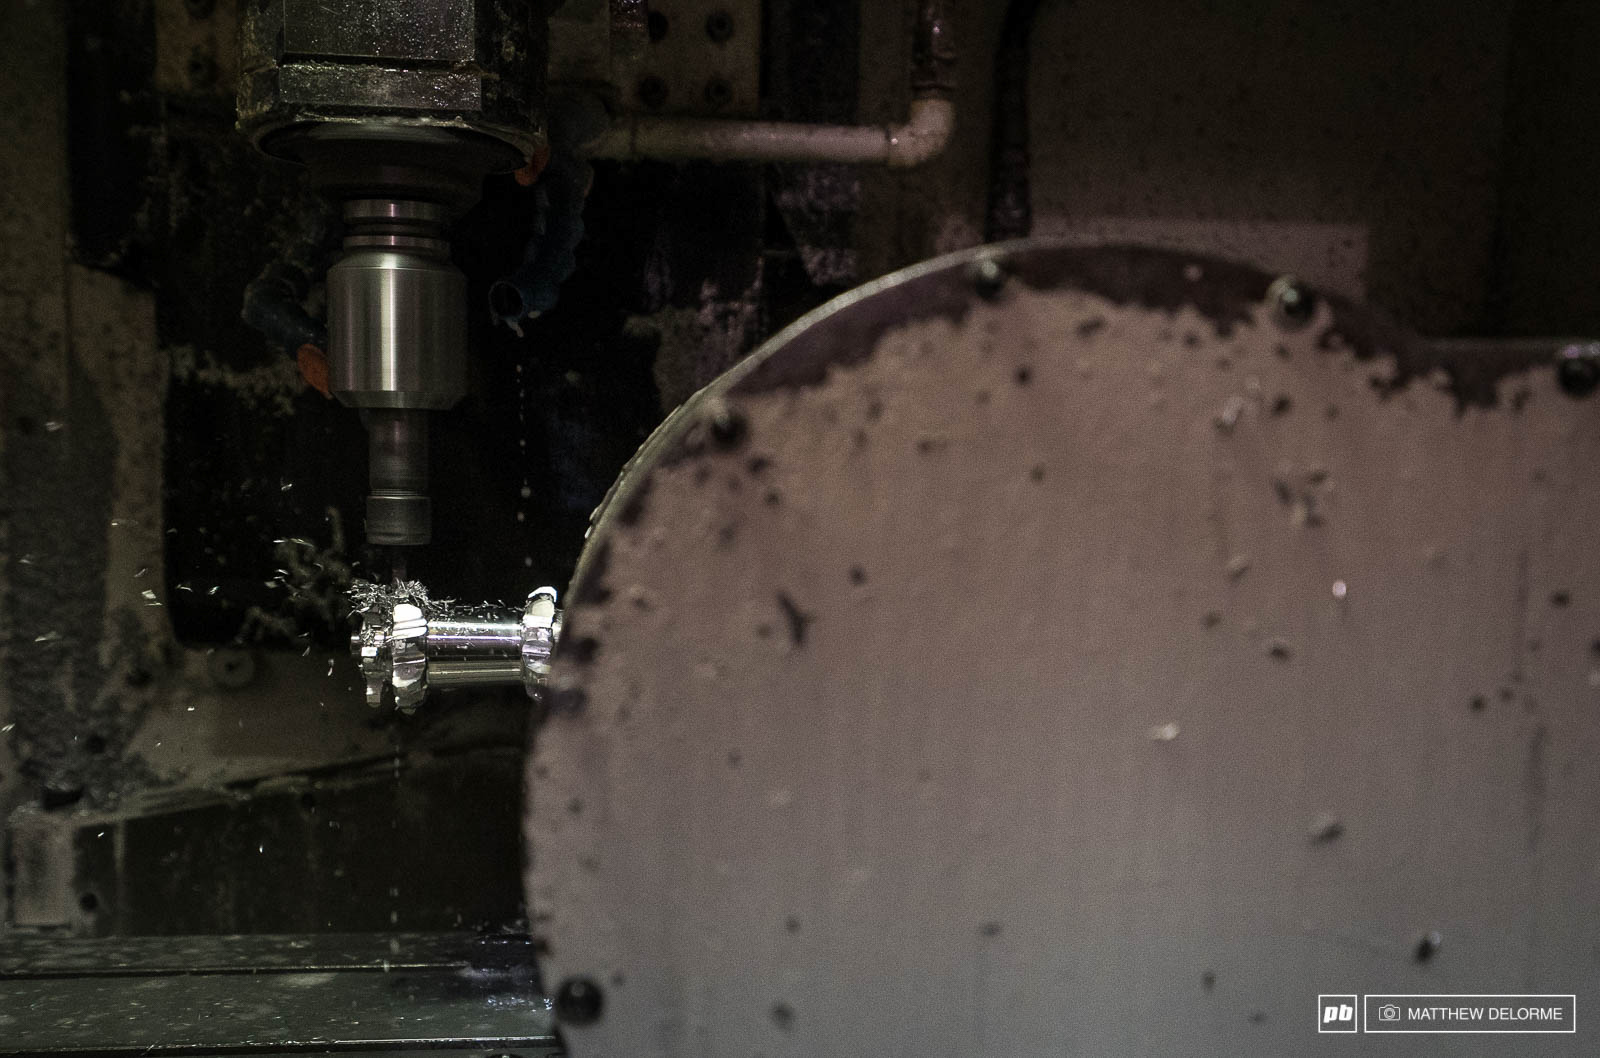 Next, spoke mount posts are milled out in a five axis milling machine.